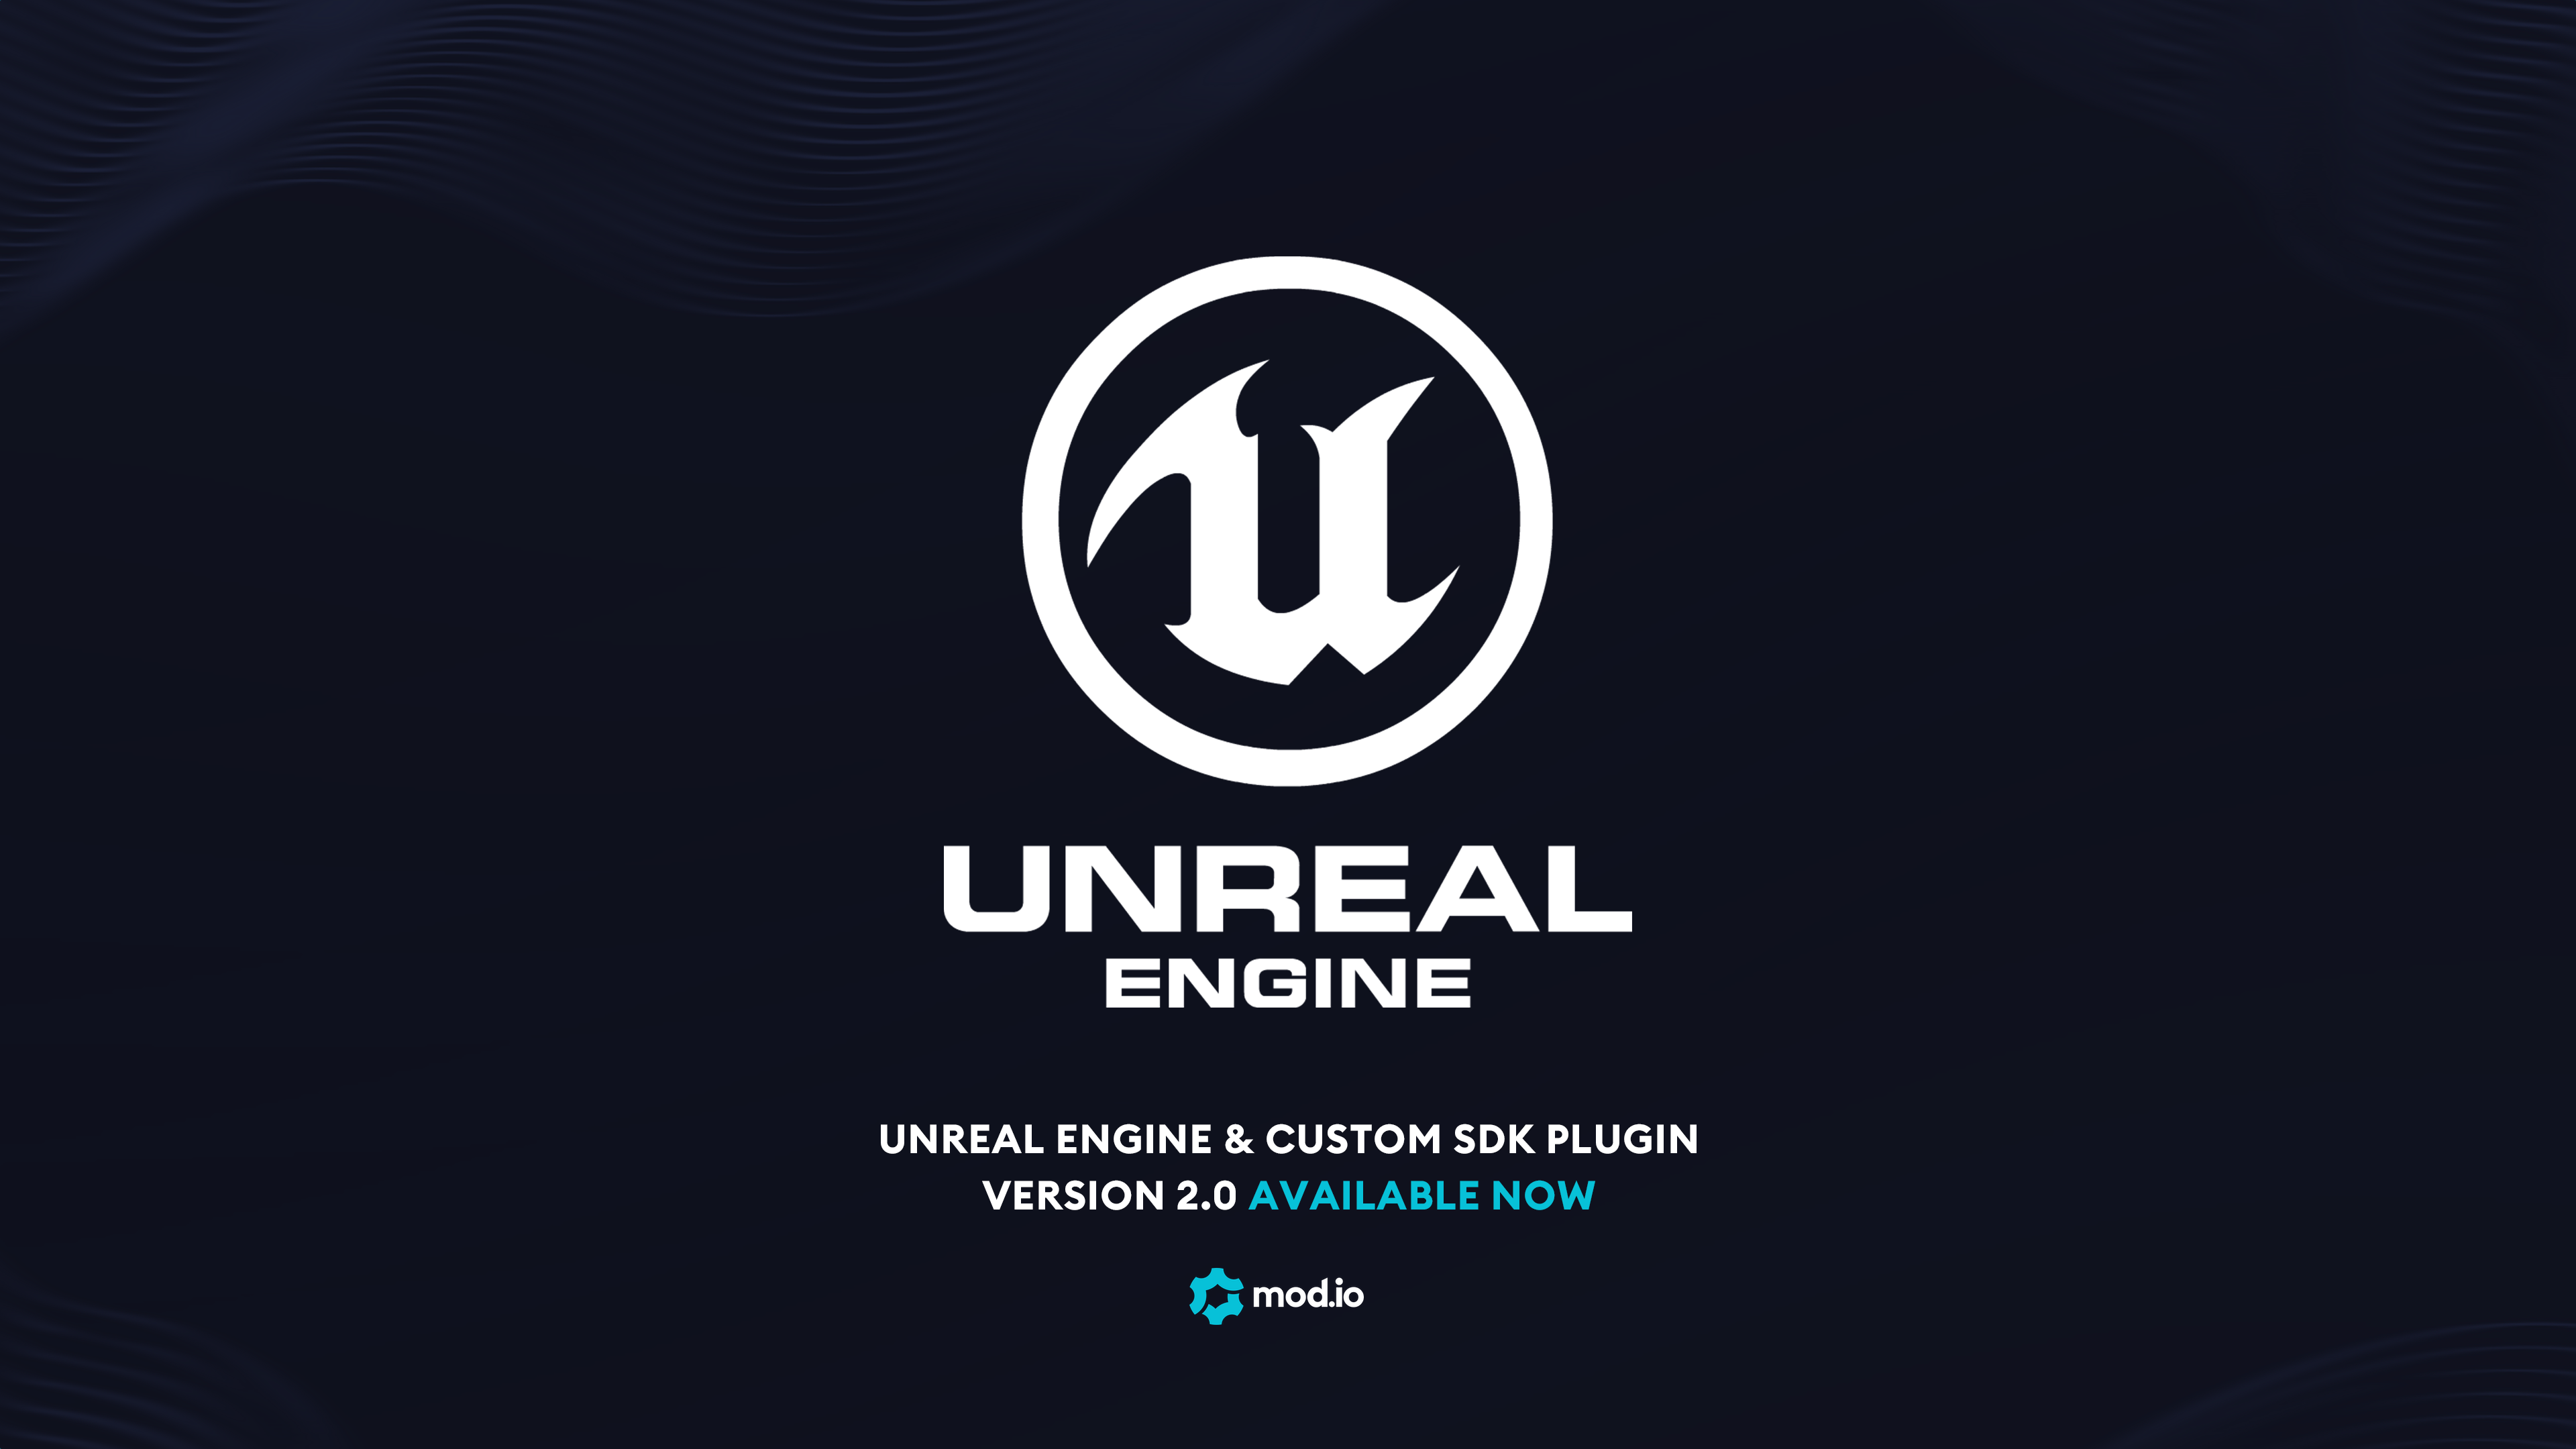 Unreal Engine Plugin & Custom SDK Updated to Version 2.0 - Available Now!